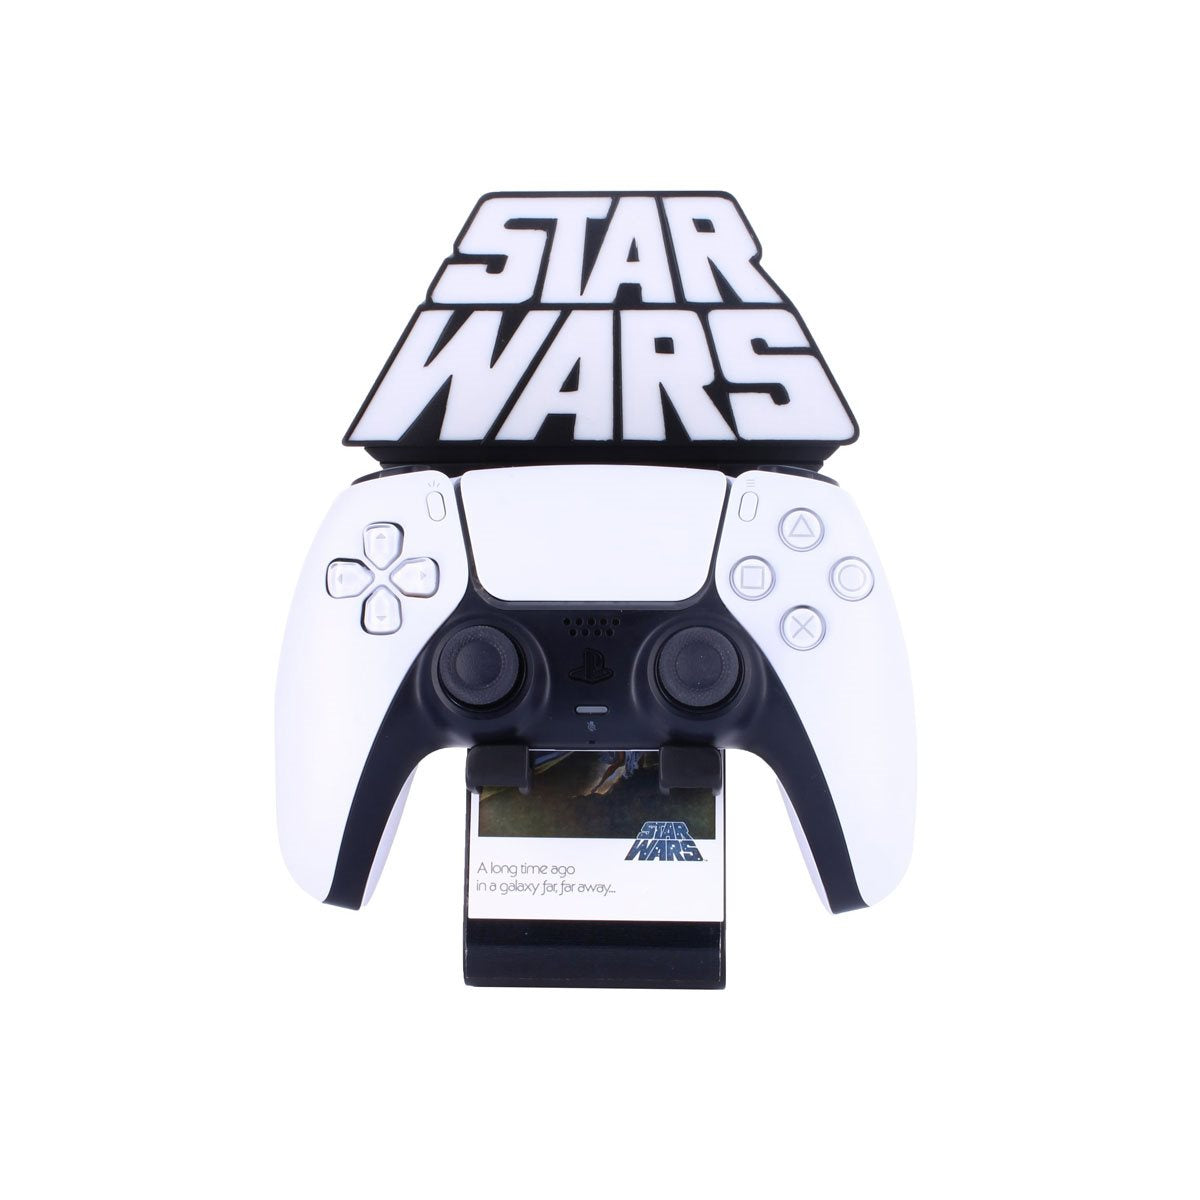 Star Wars Logo Ikon Cable Guys Controller Holder by Exquisite Gaming -Exquisite Gaming - India - www.superherotoystore.com